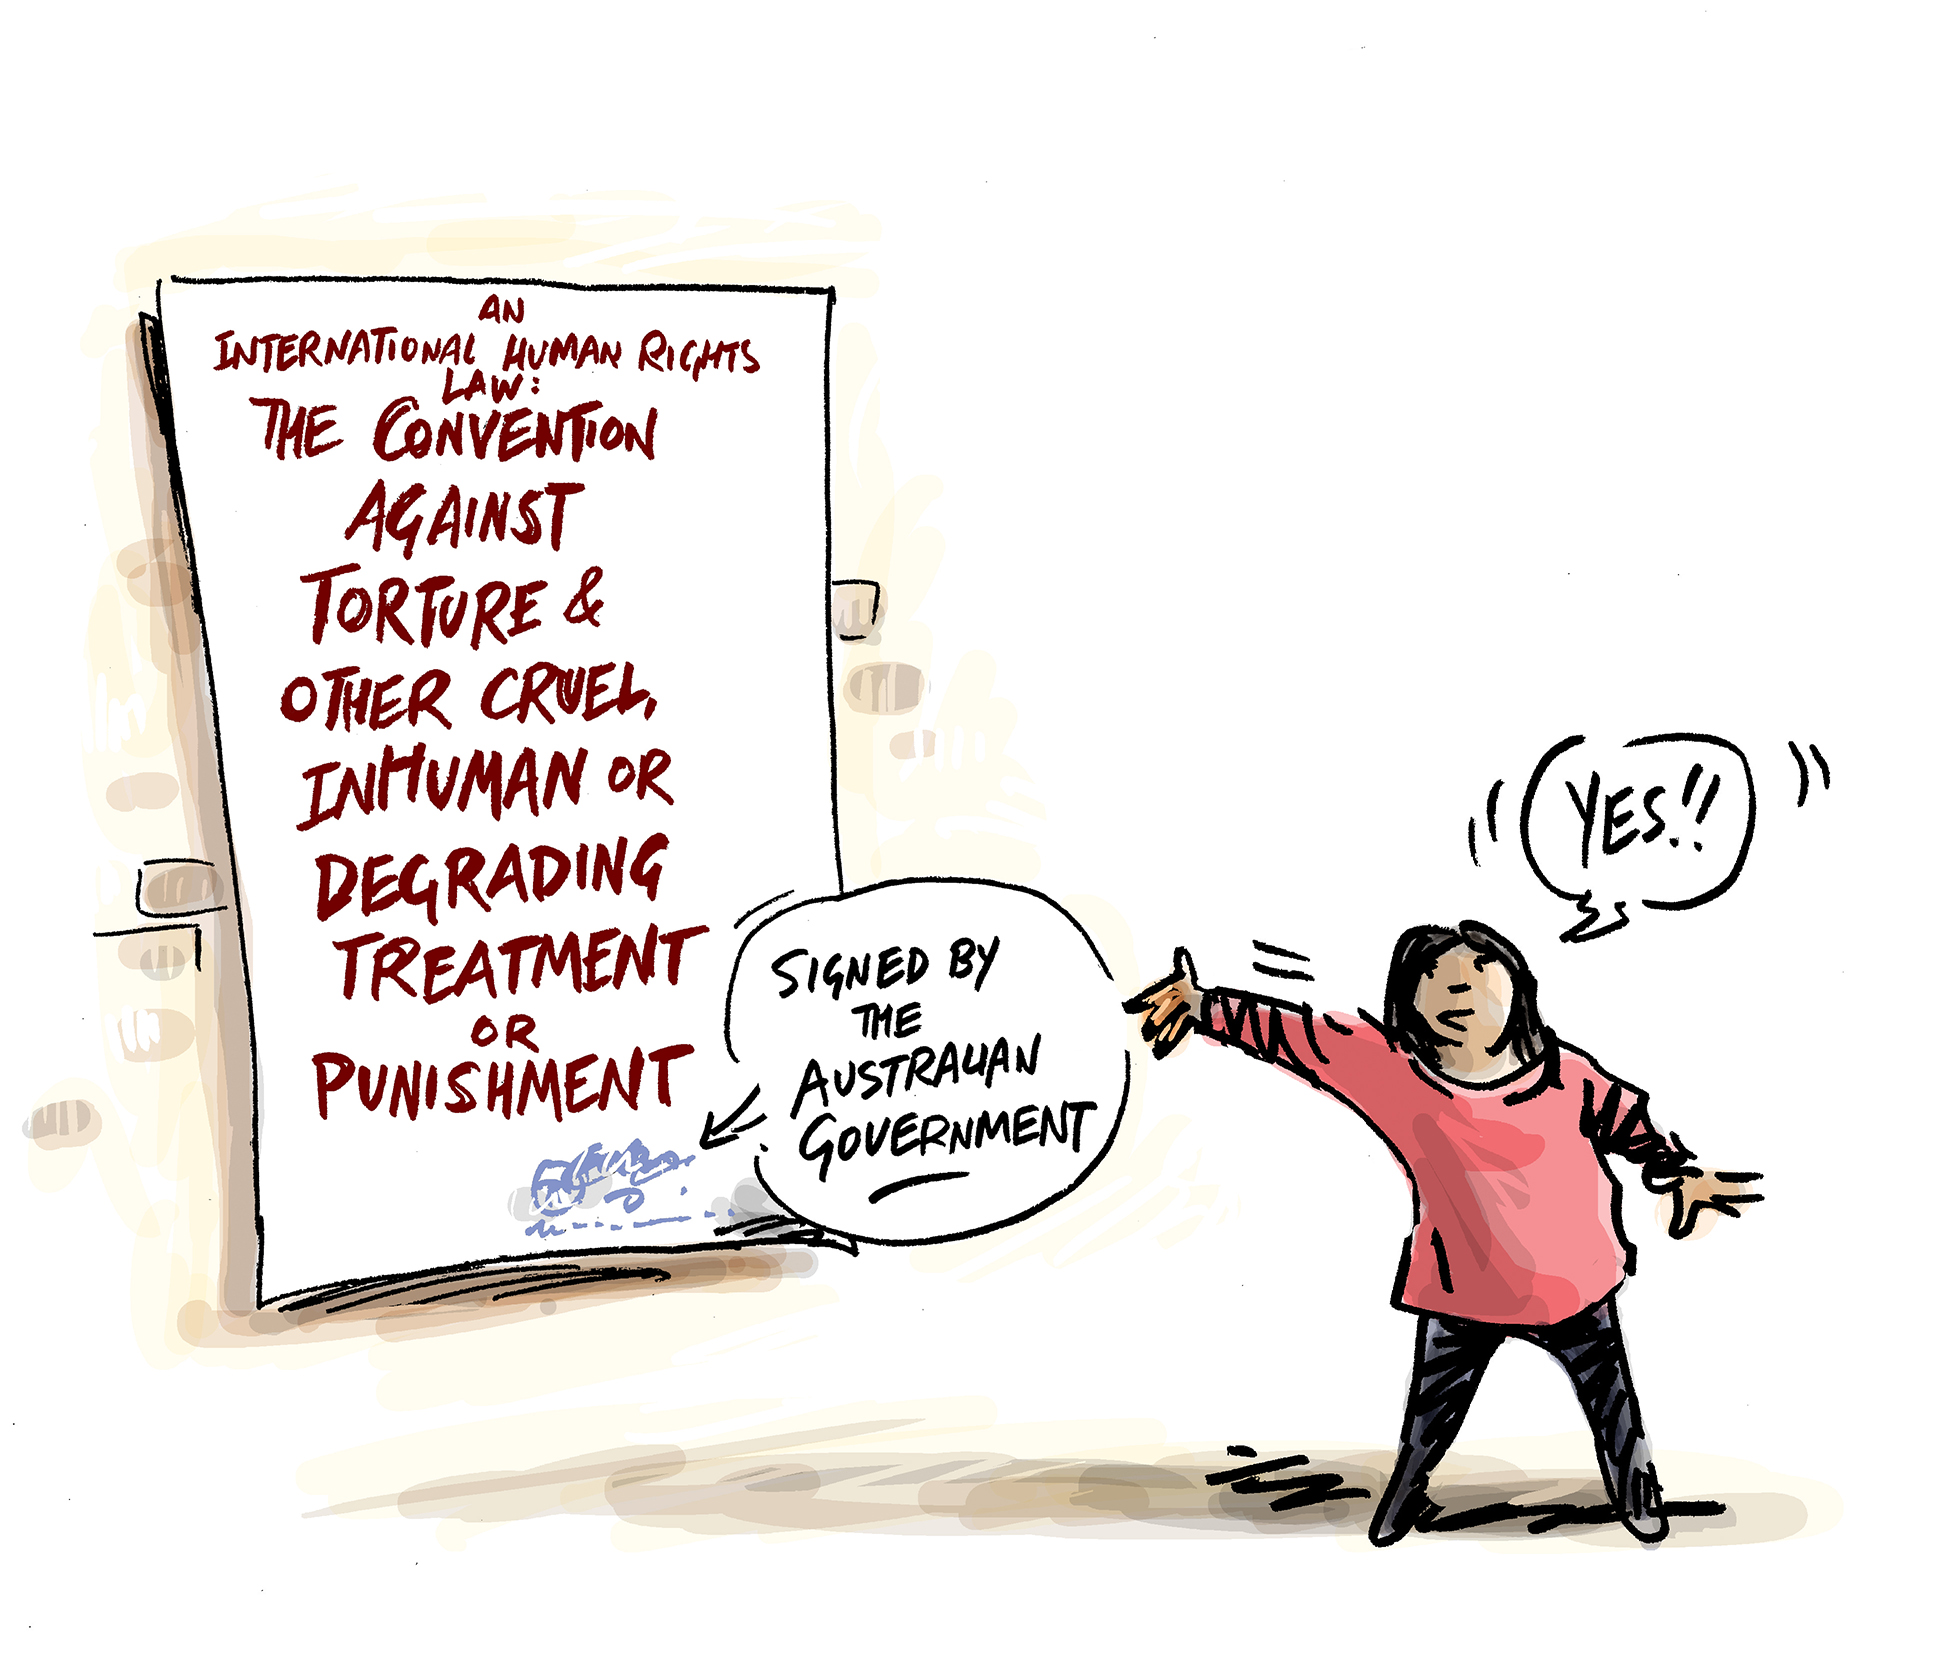 Illustration of large sign on a wall that says "An international human rights law: The convention against torture and other cruel, inhuman or degrading treatment or punishment" with a squiggle at the bottom. Speech bubbles next to a person pointing to the sign say "Signed by the Australian Government" and "Yes!!".